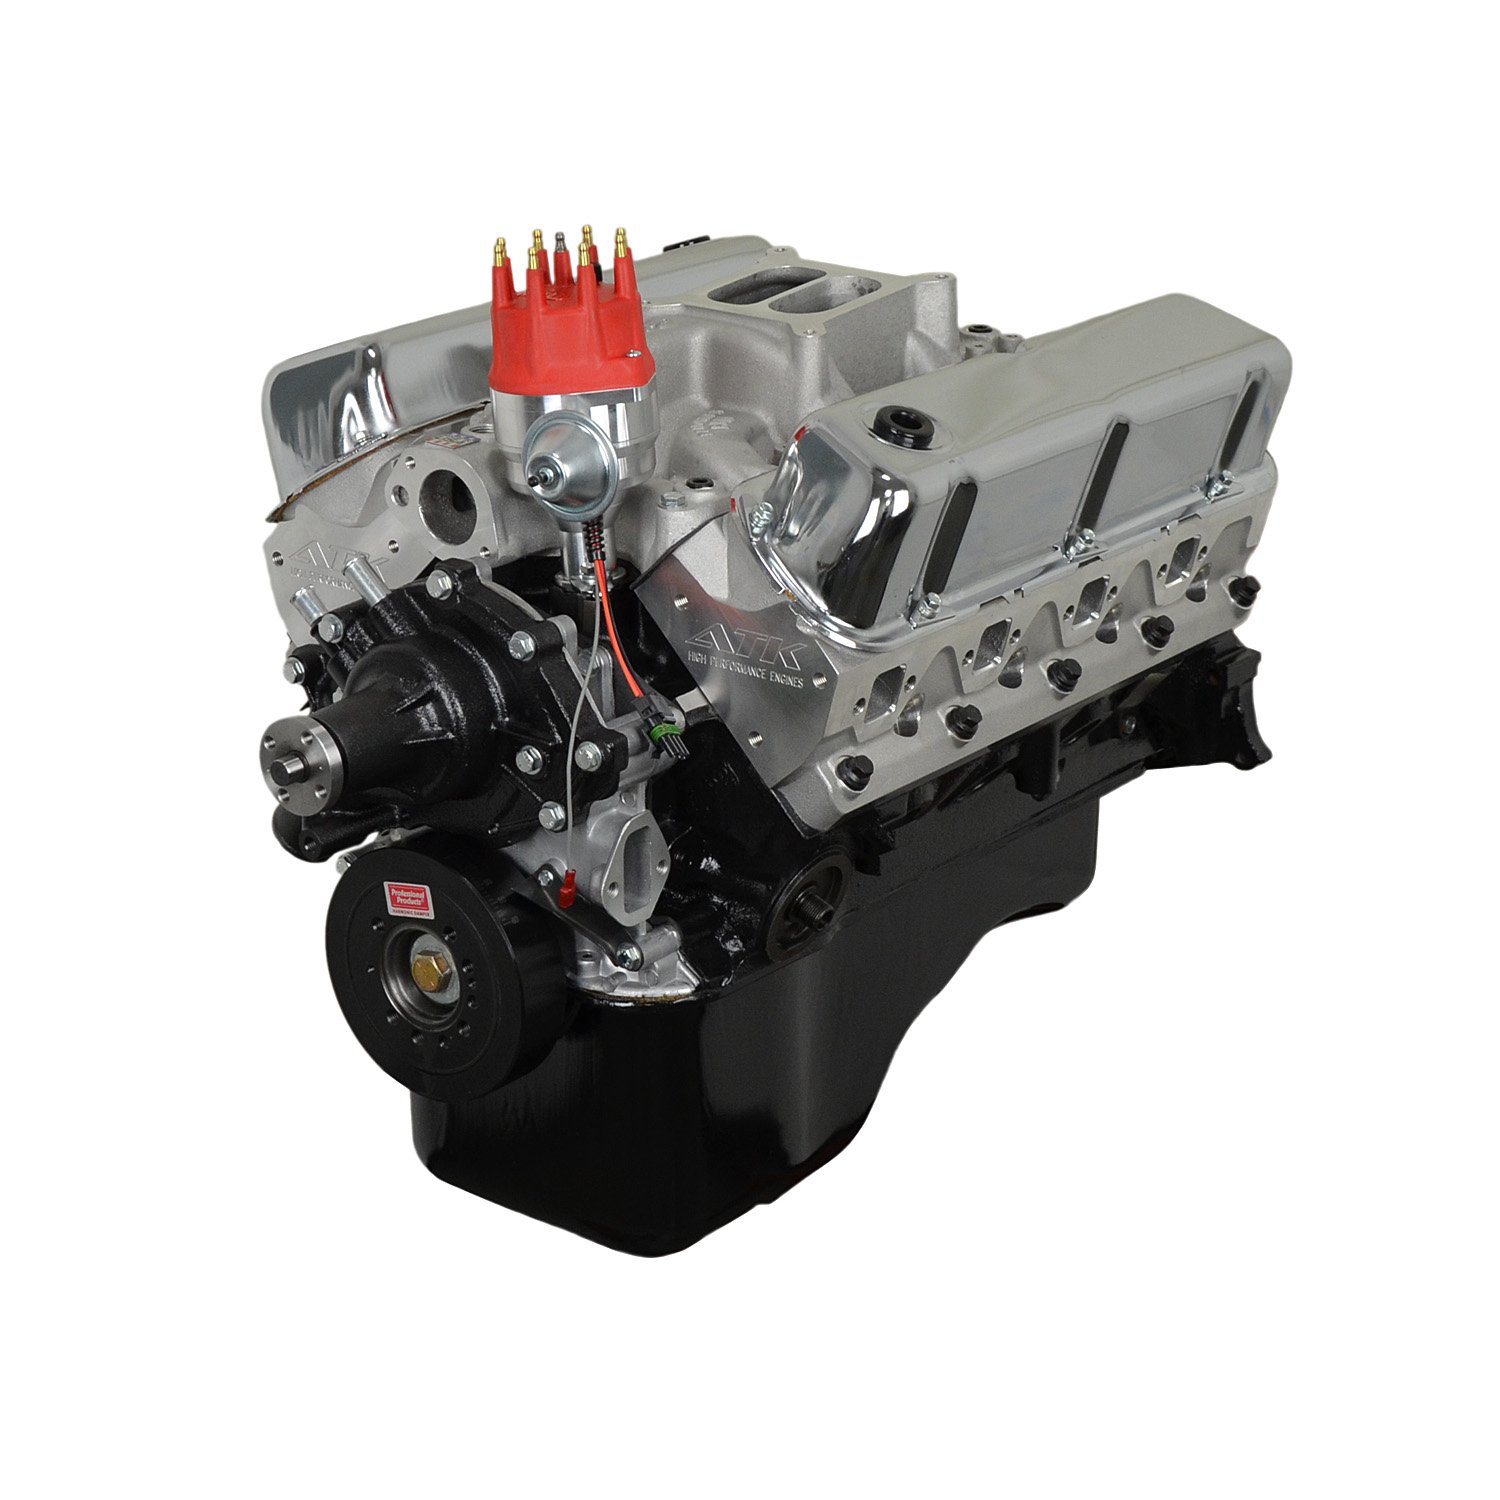 HP78M High Performance Crate Engine Small Block Ford 302ci / 375HP / 380TQ